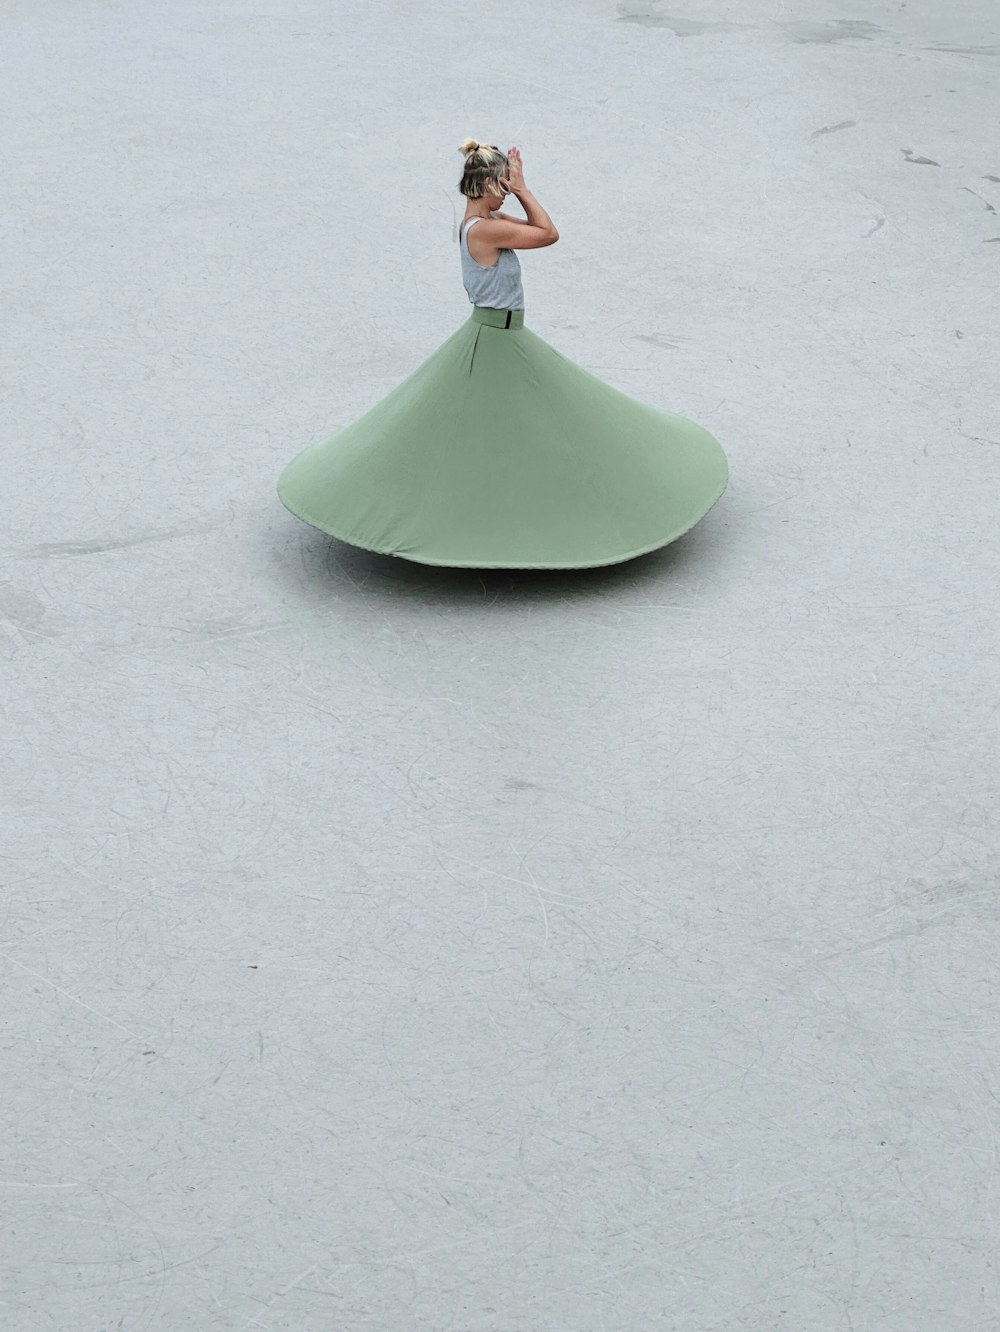 a woman in a green dress is sitting on a large object